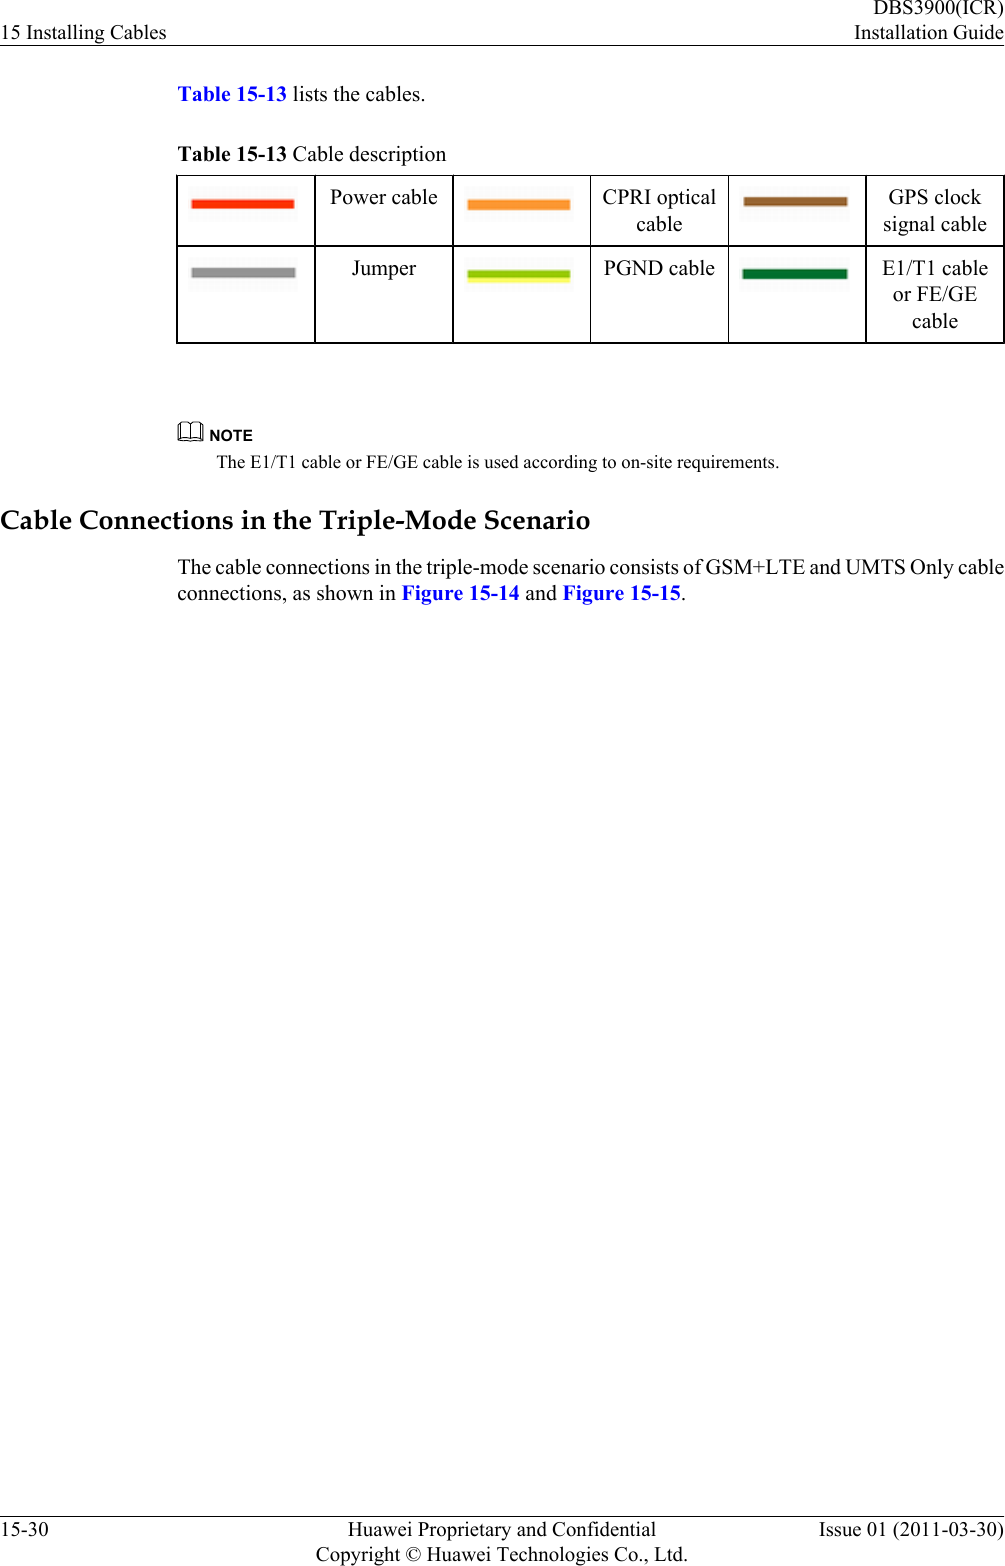 Table 15-13 lists the cables.Table 15-13 Cable descriptionPower cable CPRI opticalcableGPS clocksignal cableJumper PGND cable E1/T1 cableor FE/GEcable NOTEThe E1/T1 cable or FE/GE cable is used according to on-site requirements.Cable Connections in the Triple-Mode ScenarioThe cable connections in the triple-mode scenario consists of GSM+LTE and UMTS Only cableconnections, as shown in Figure 15-14 and Figure 15-15.15 Installing CablesDBS3900(ICR)Installation Guide15-30 Huawei Proprietary and ConfidentialCopyright © Huawei Technologies Co., Ltd.Issue 01 (2011-03-30)